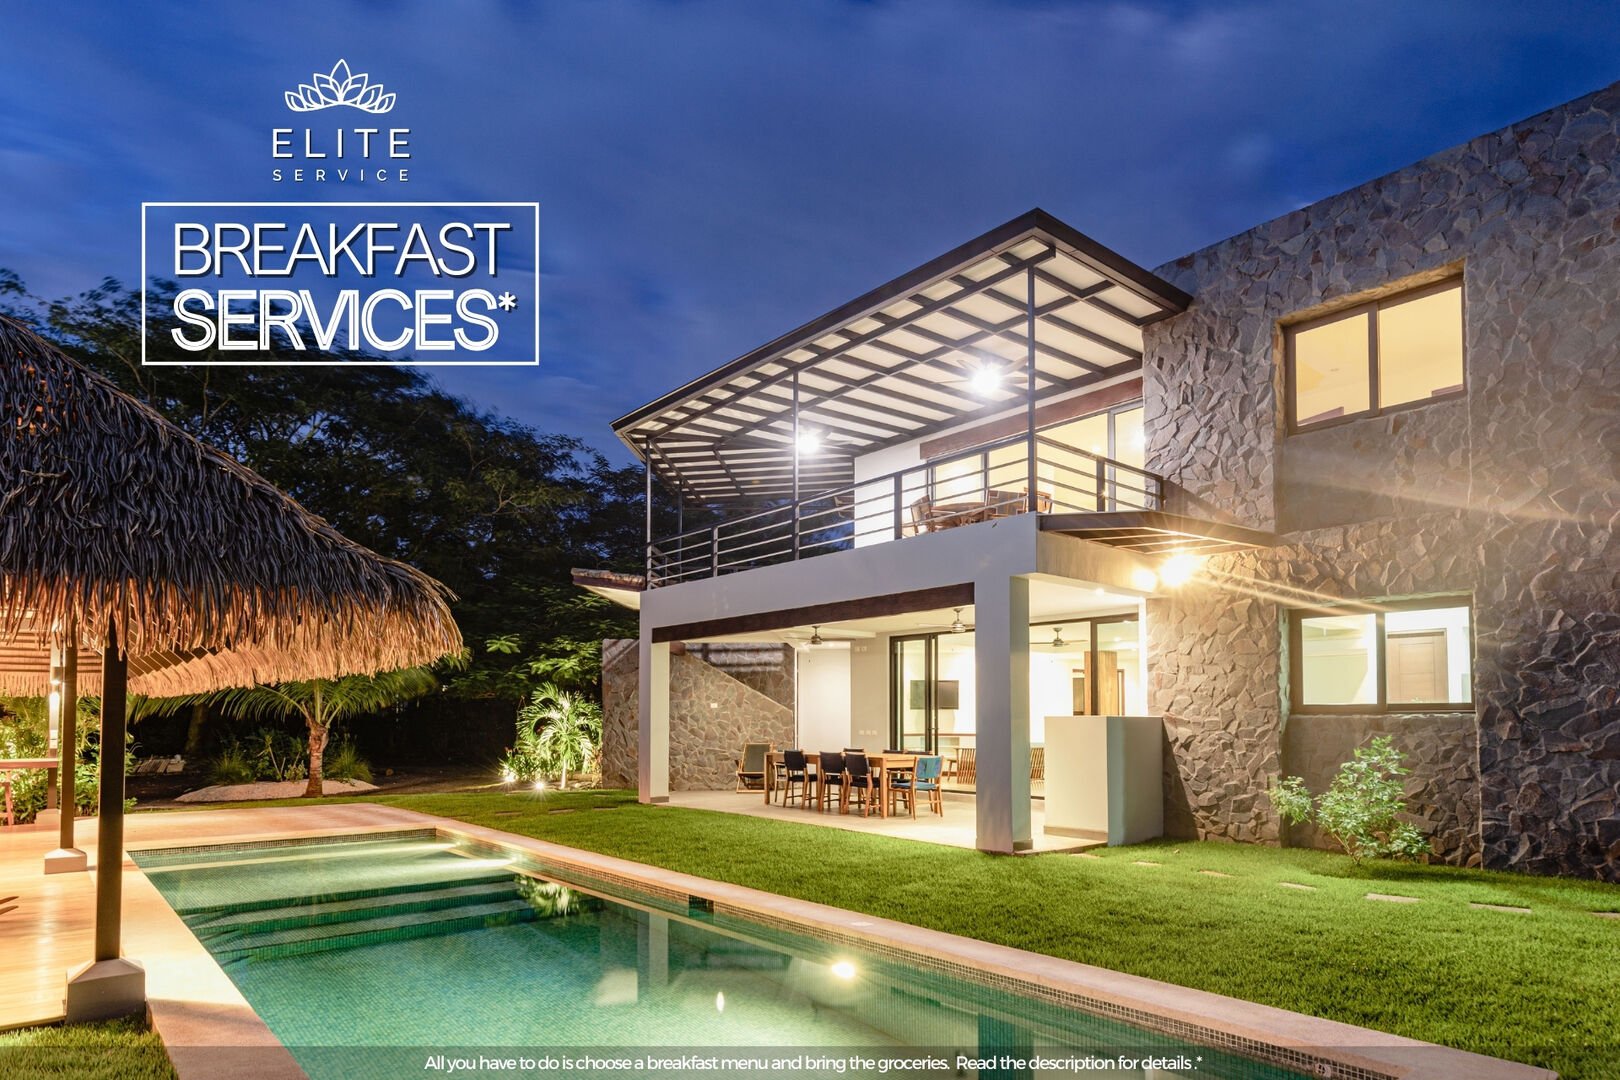 Welcome to Casa Hamacas Where Luxury Meets Serenity with Our Exclusive Elite Service!